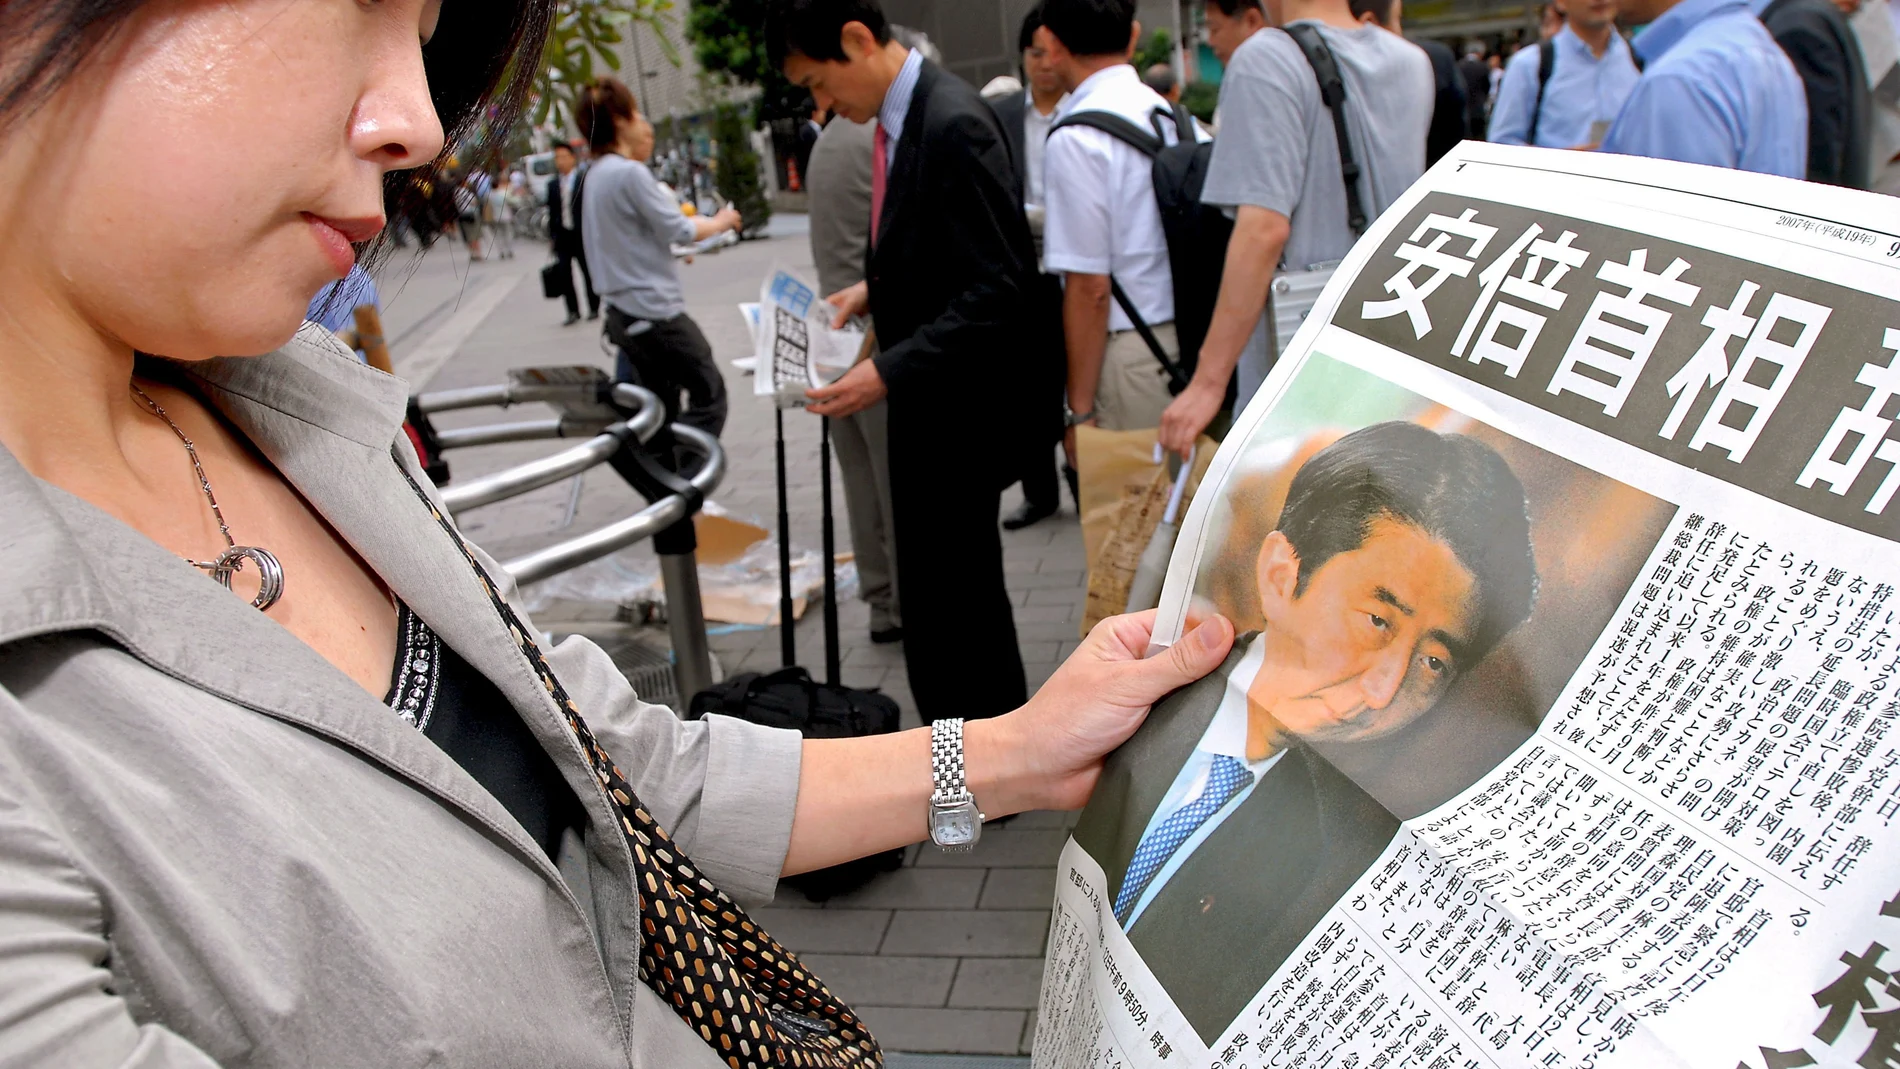 Tokyo (Japan), 12/09/2007.- (FILE) - Businesswoman Nahoko Tanaka reads an extra published by a local Japanese newspaper reporting Prime Minister Shinzo Abe's announcement that he plans to step down in Tokyo, Japan, 12 September 2007 (reissued 28 August 2020). Abe is reportedly about to announce his resignation as prime minister on 28 August 2020. (Japón, Tokio) EFE/EPA/ROBERT GILHOOLY